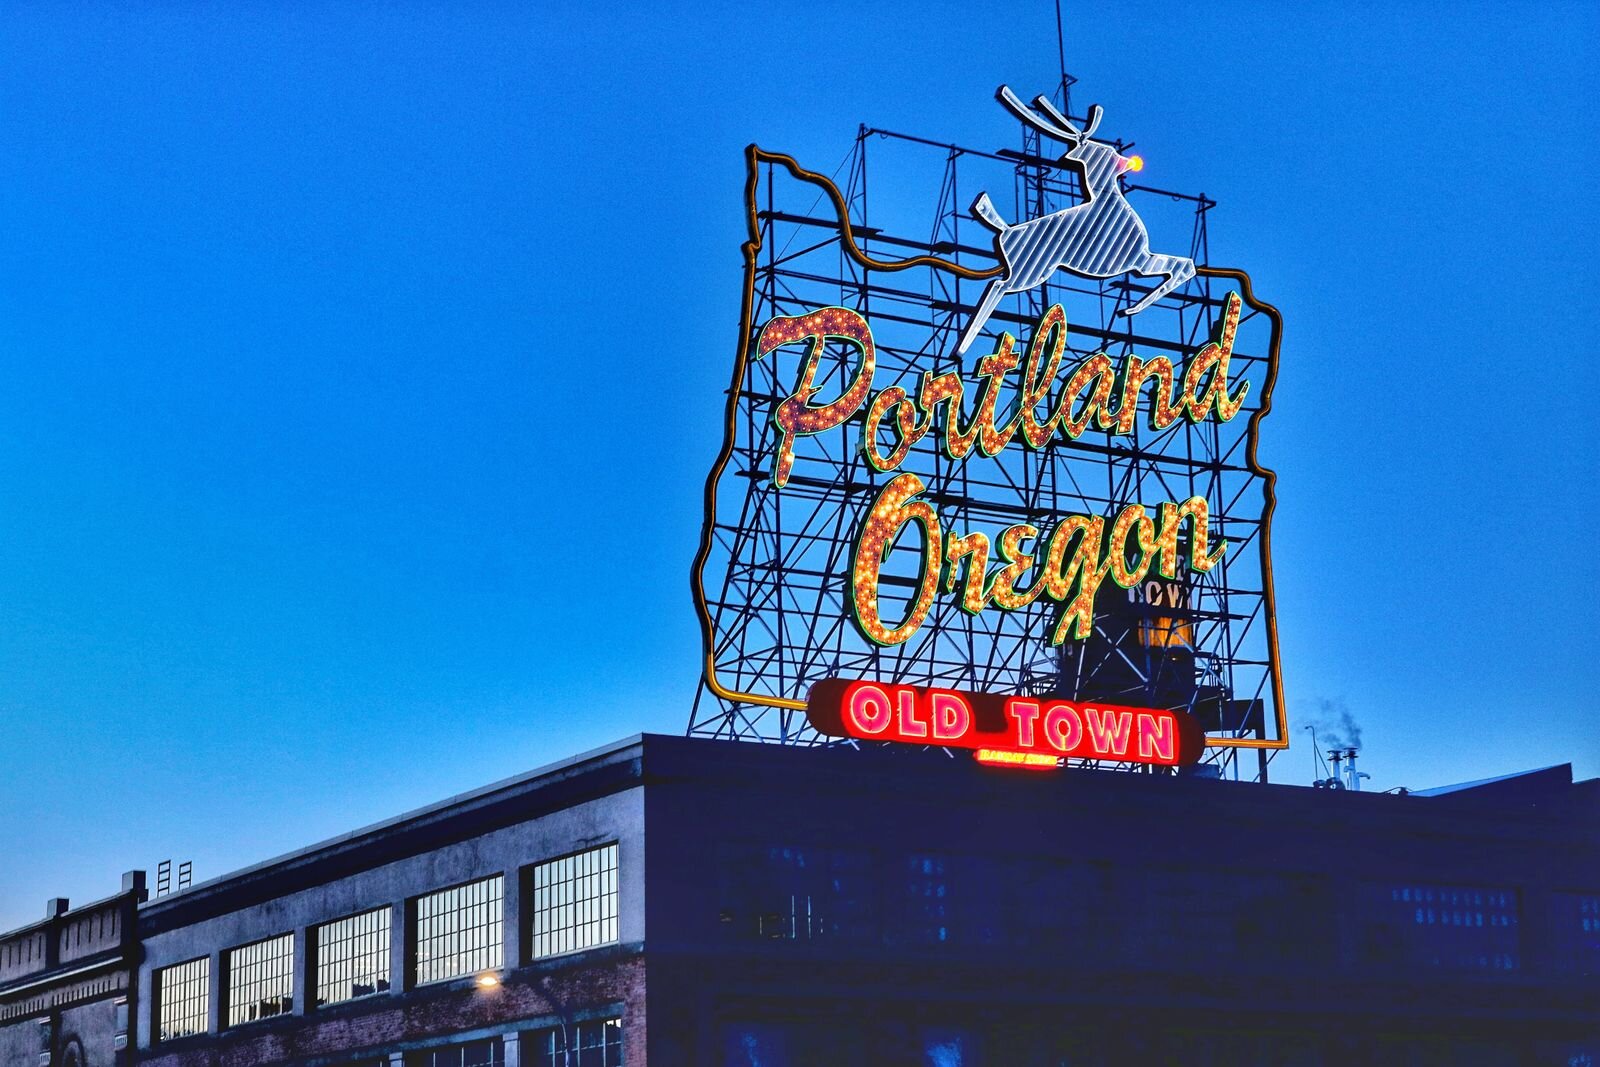 The Portland bucket list: 40 unique things to do in Portland Oregon (by a local) - 